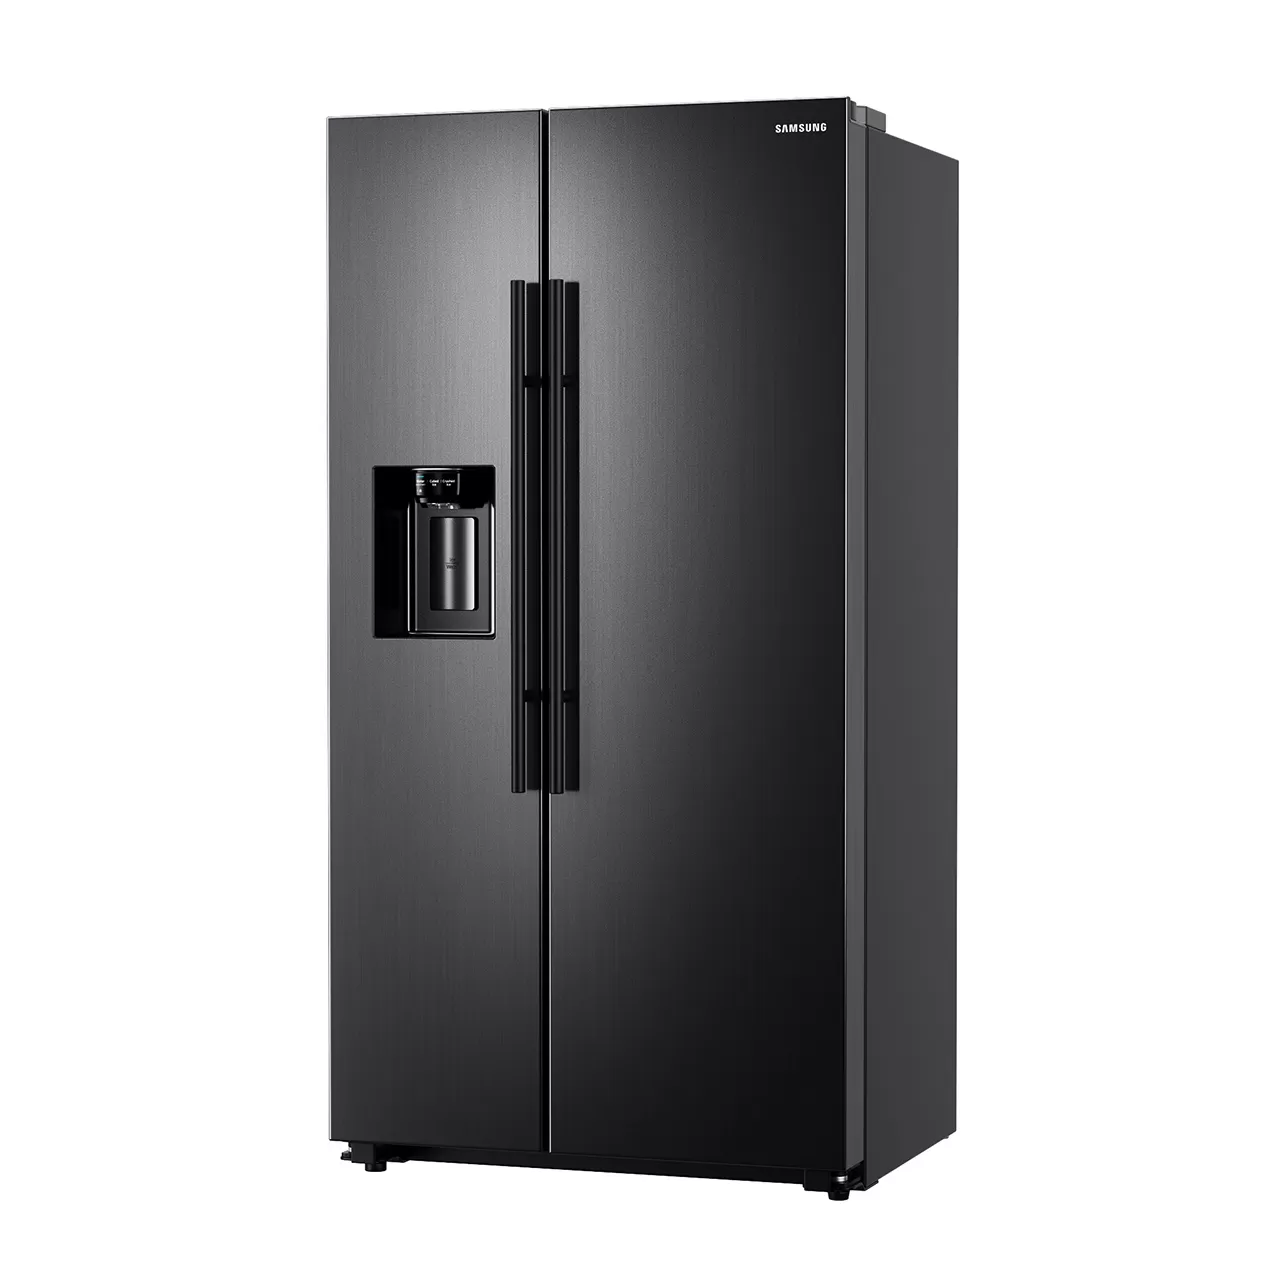 Kitchen – rs8000-side-by-side-fridge-freezer-rs67n-by-samsung